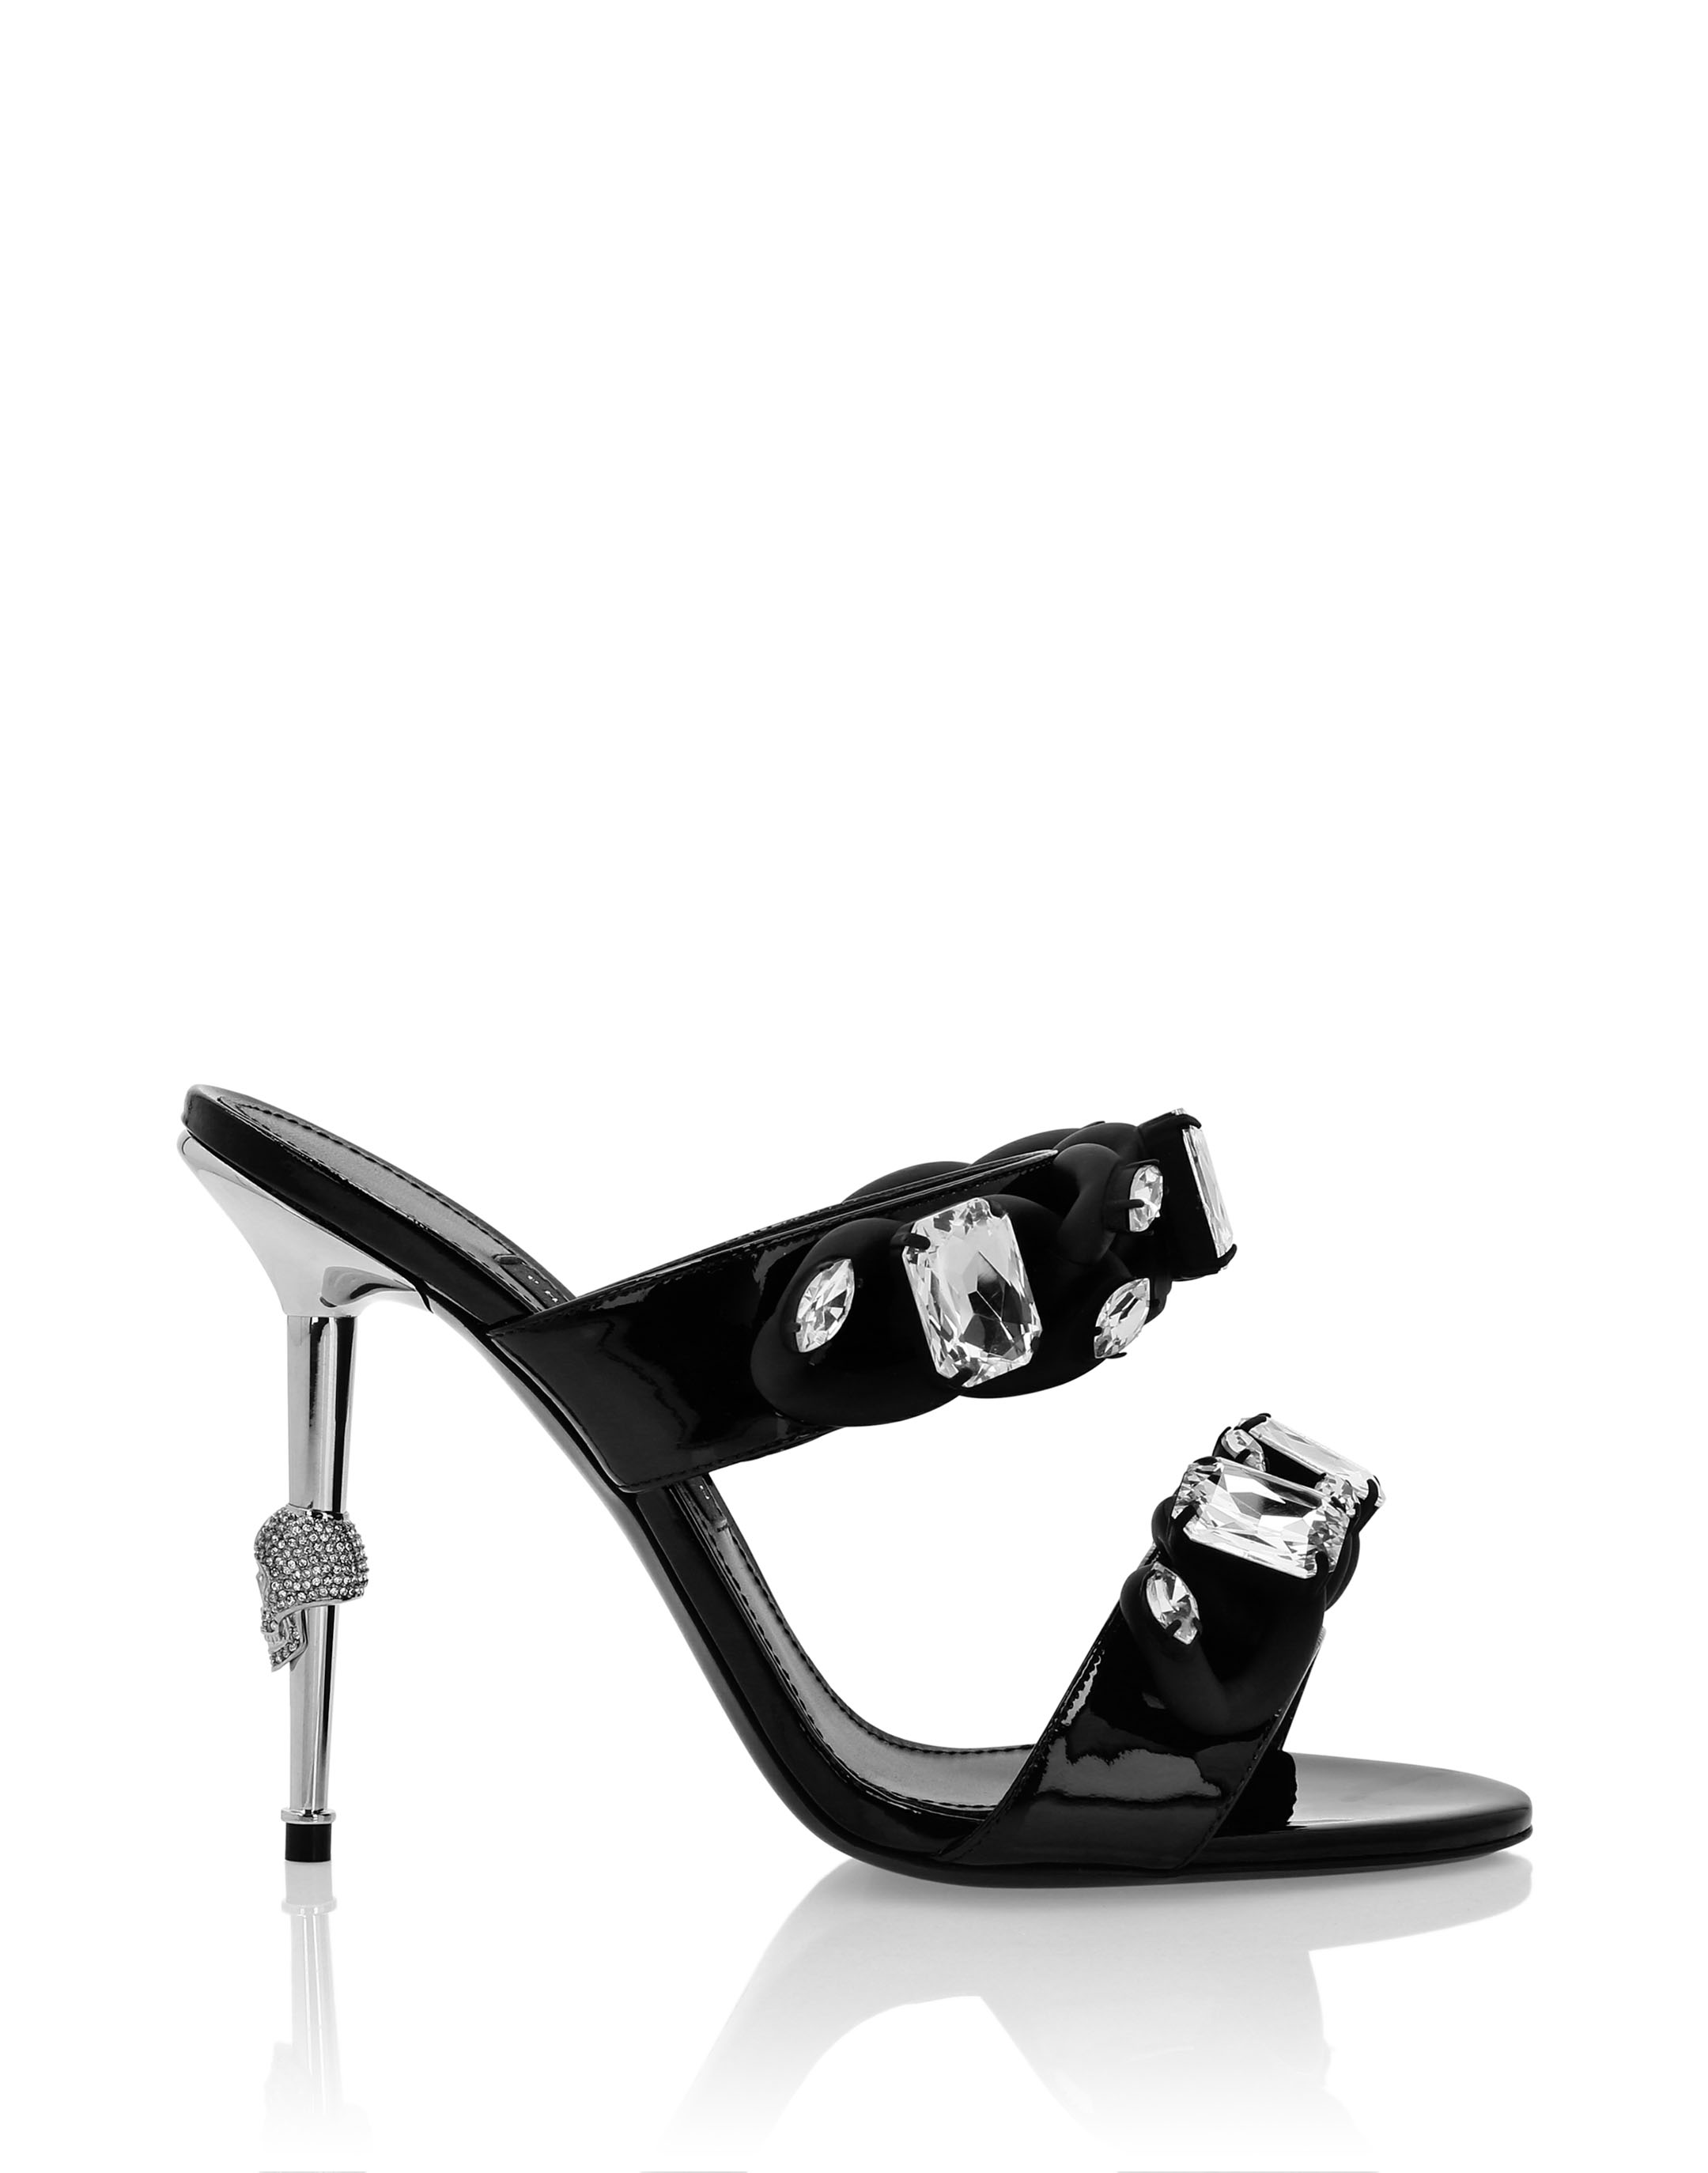 Patent leather Sandals High Heels Chains | Philipp Plein Outlet